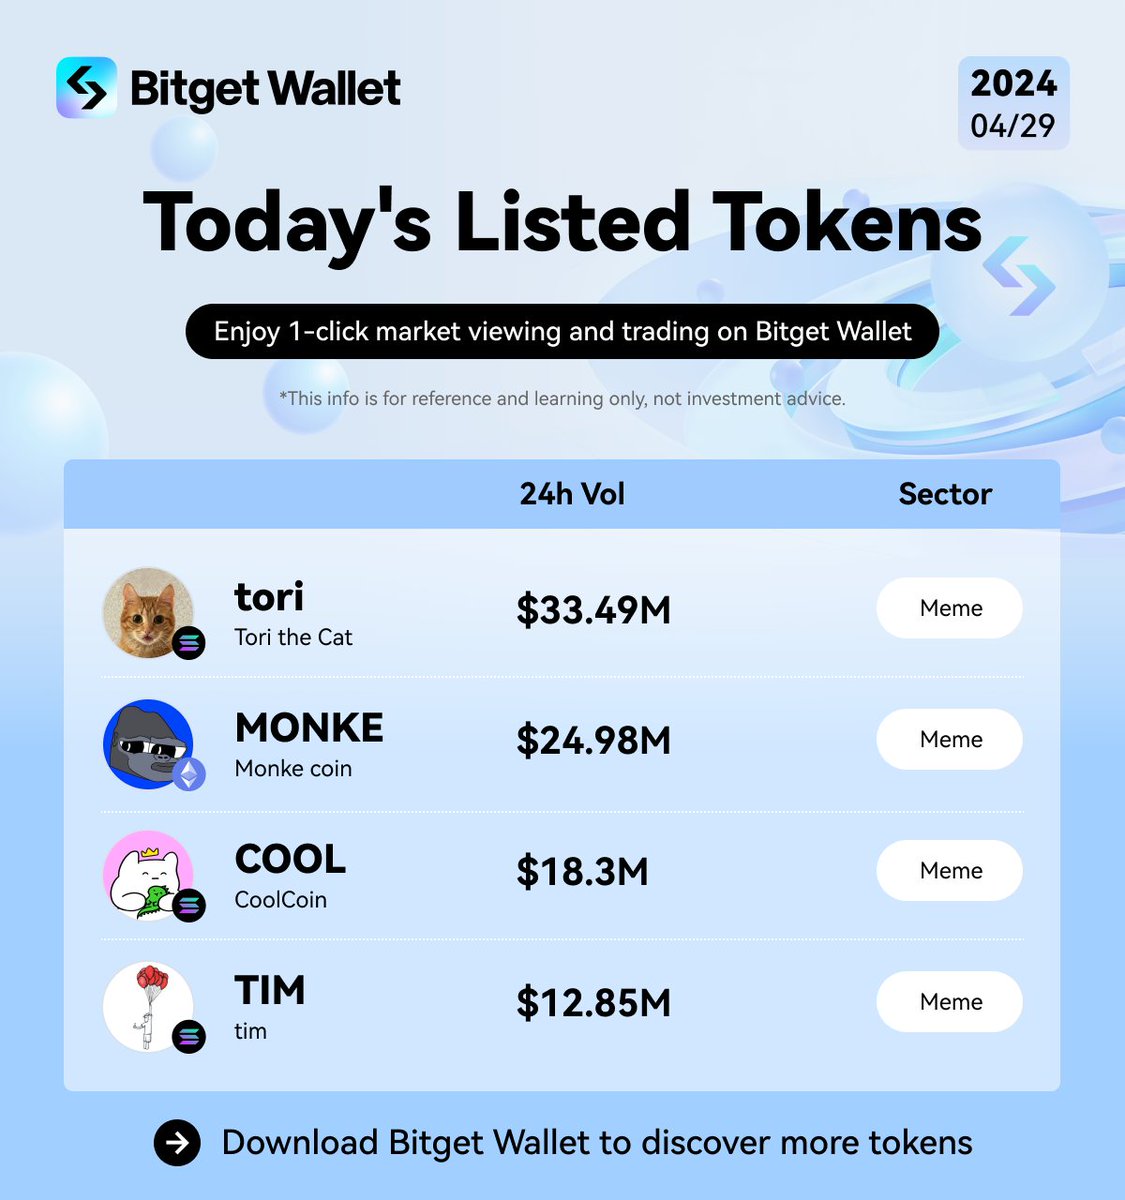 GM! It's a good day for meme trading 🤝 Let's find out which coins are listed on our list today: $TIM $COOL $MONKE $TORI @BeLykeTim @CoolmanUniverse @MonkecoinERC @Tori_Solana Stay tuned for our next #FairLaunchpool, exclusive to all #BWBPoints holders! #Meme #MemeCoinSeason